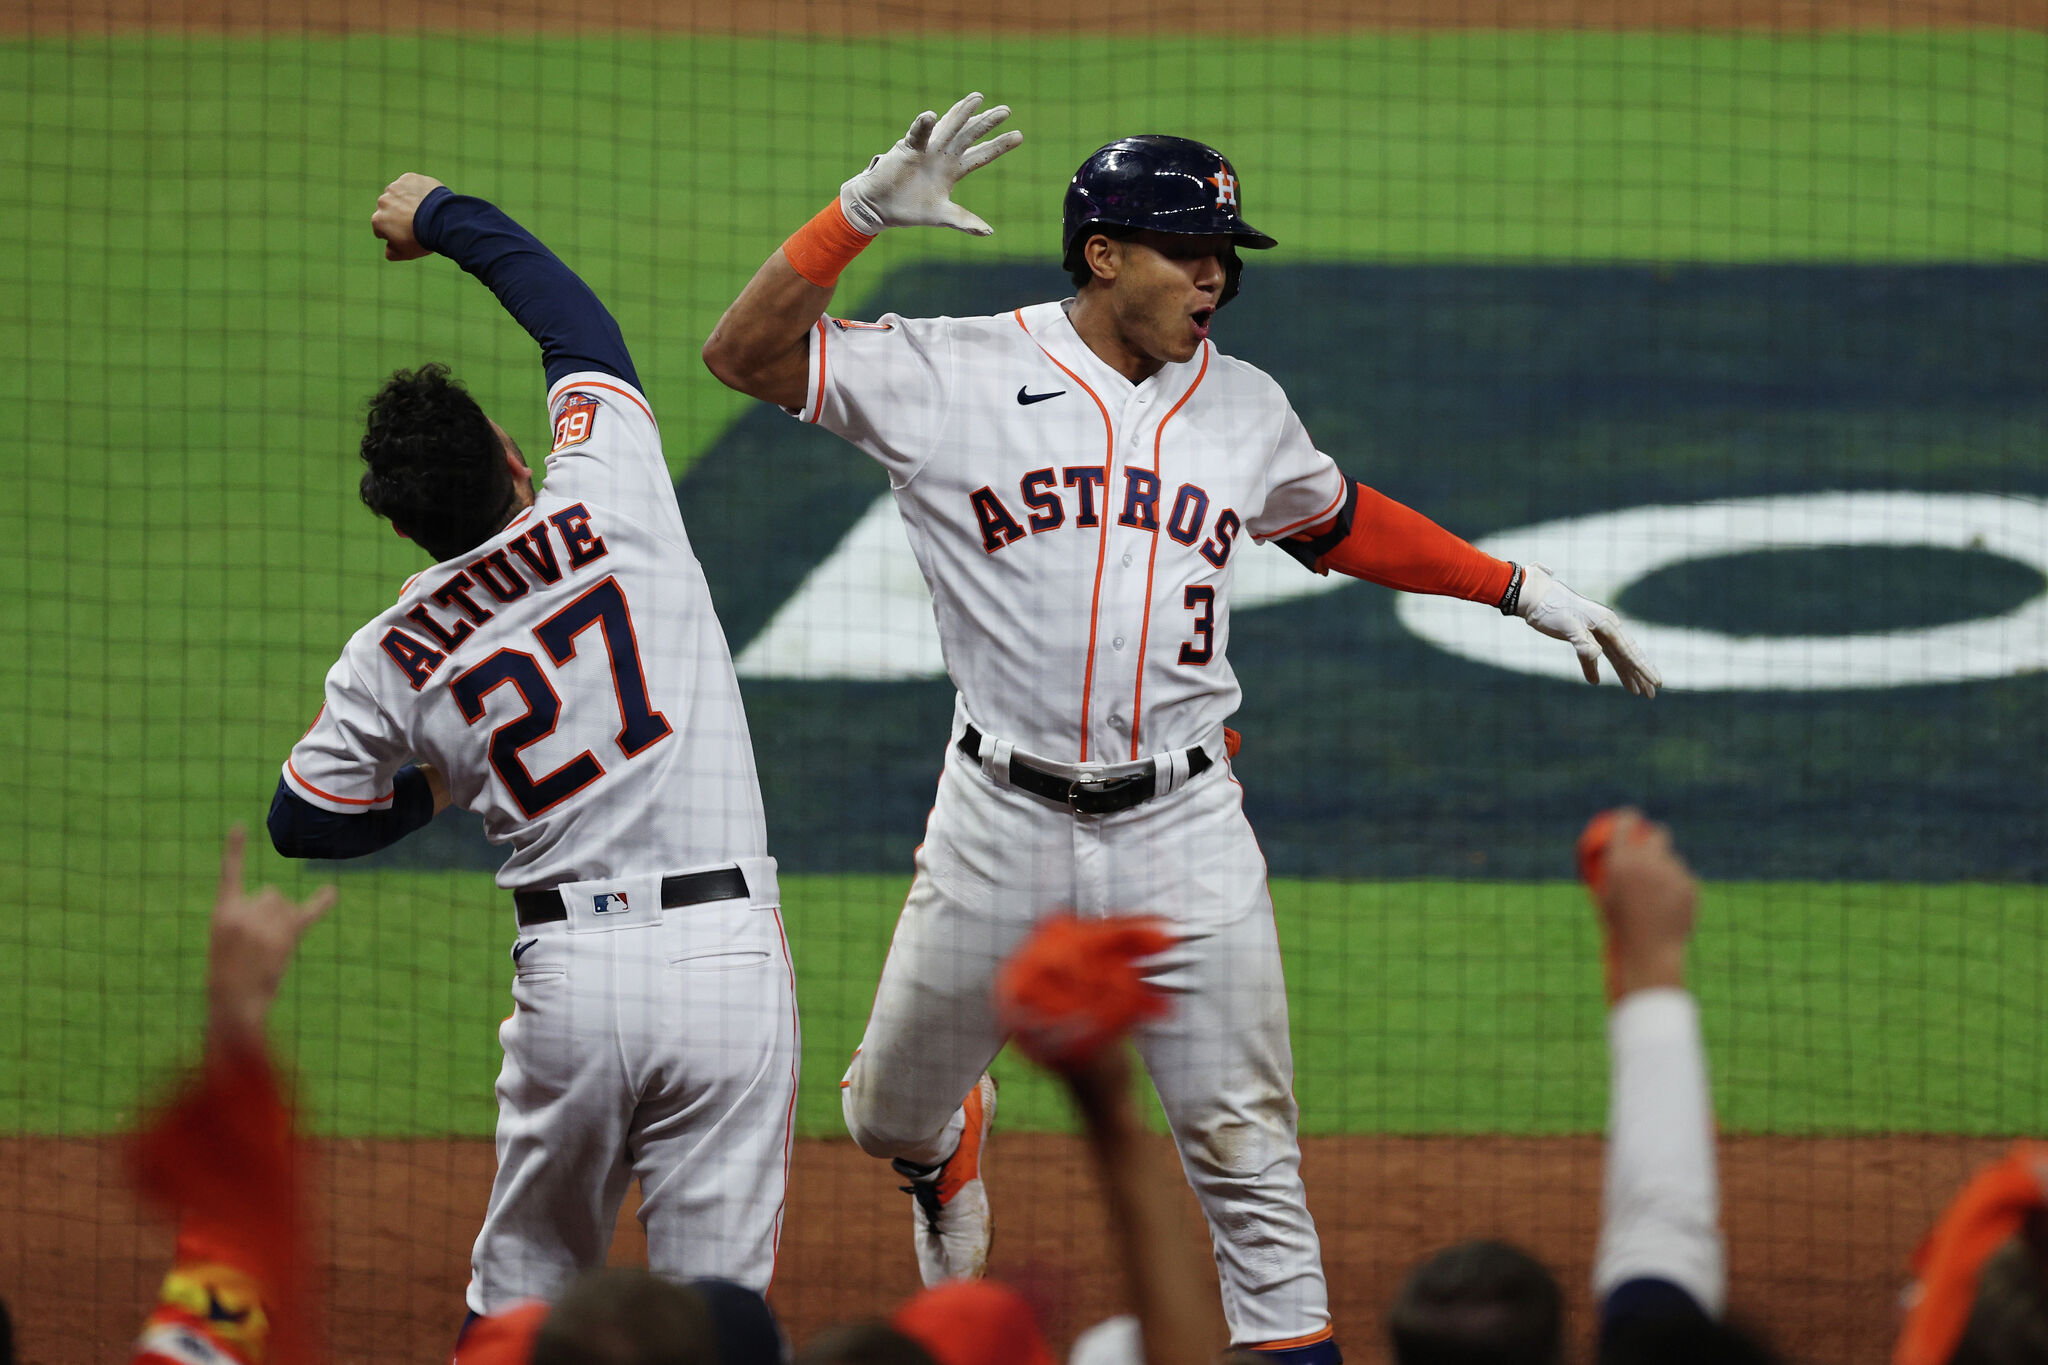 New York Yankees Need More Offense To Close The Gap With The Houston Astros